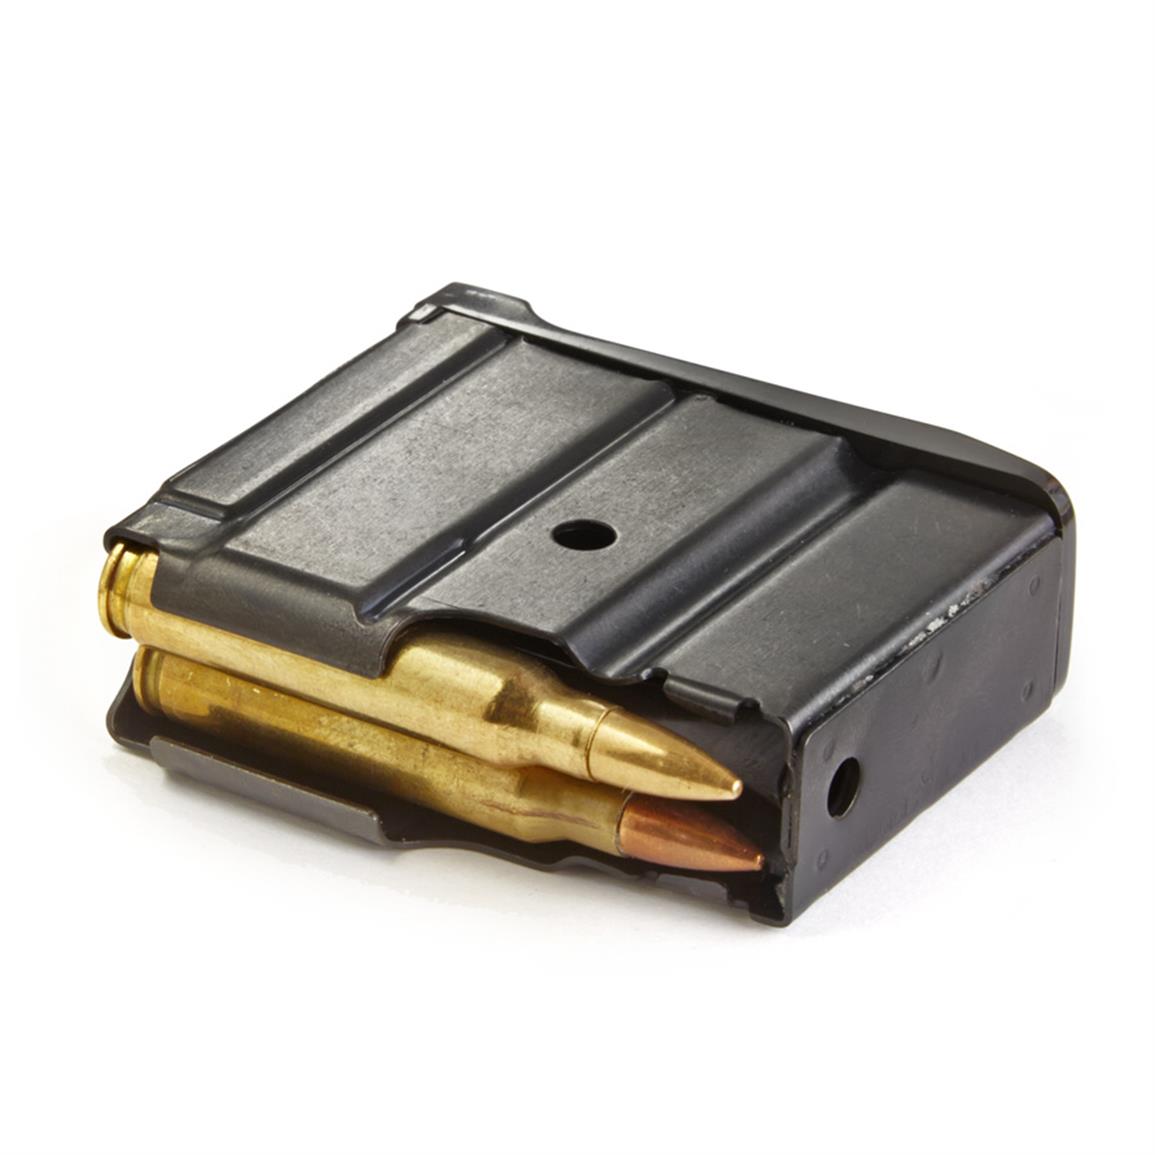 Ruger Mini-30 5 Rounds Magazine for sale online